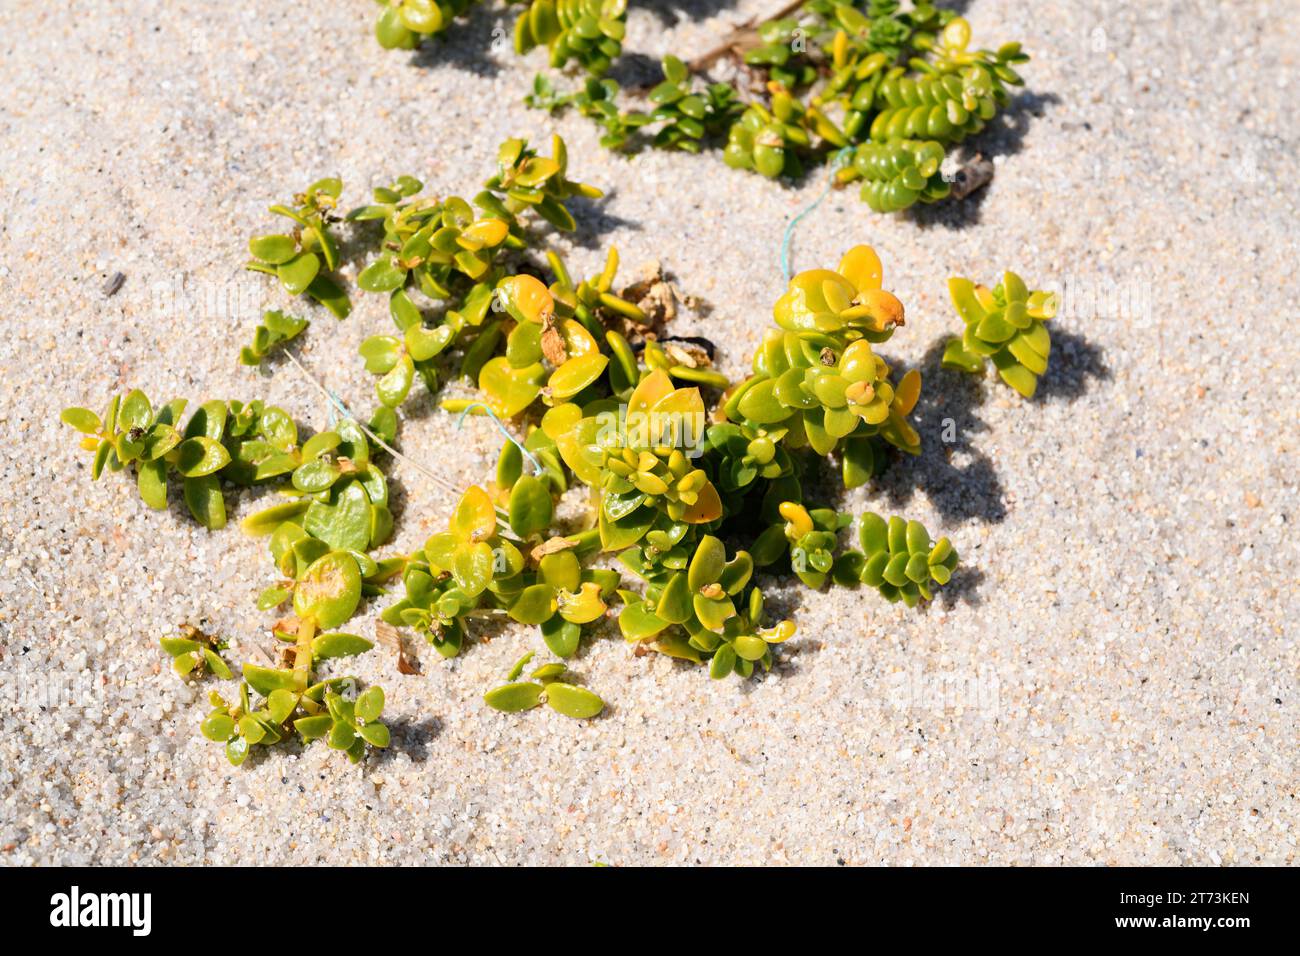 Sea sandwort (Honckenya peploides) is an edible succulent perennial herb native to sandy coasts of northern Europe and Atlantic coasts of north Spain. Stock Photo